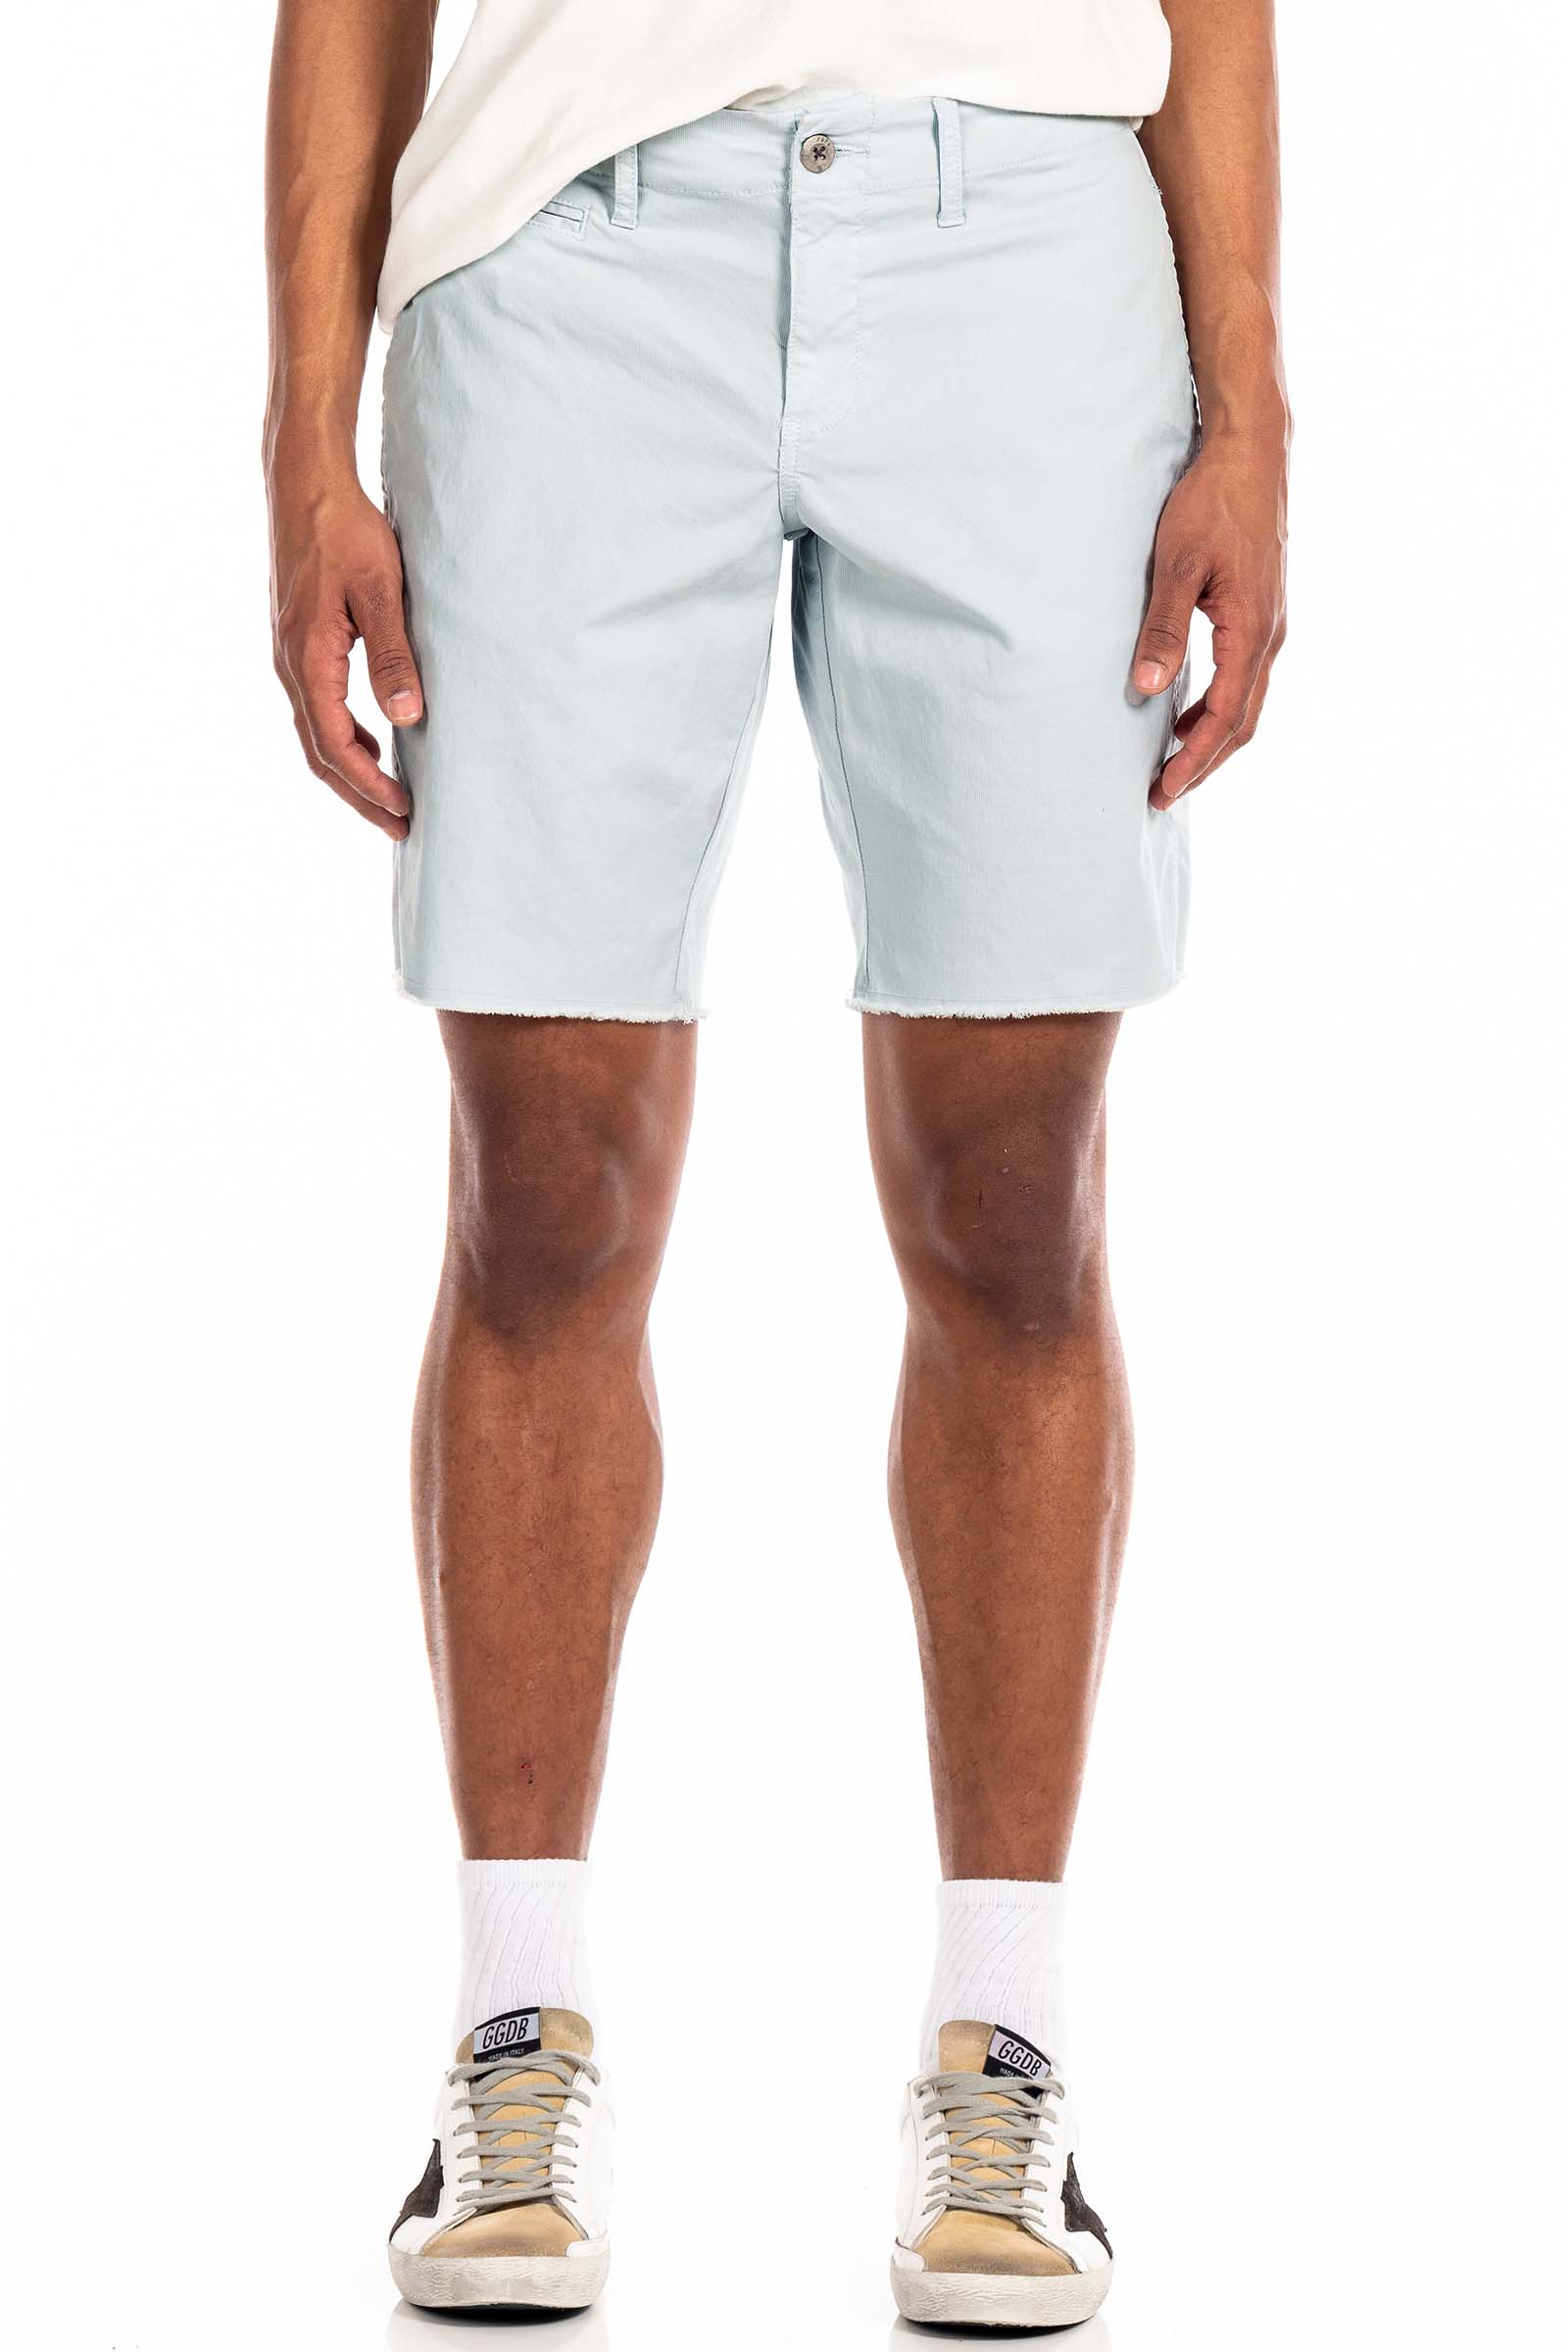 Original Paperbacks Rockland Chino Short in Waterfall on Model Cropped Front View